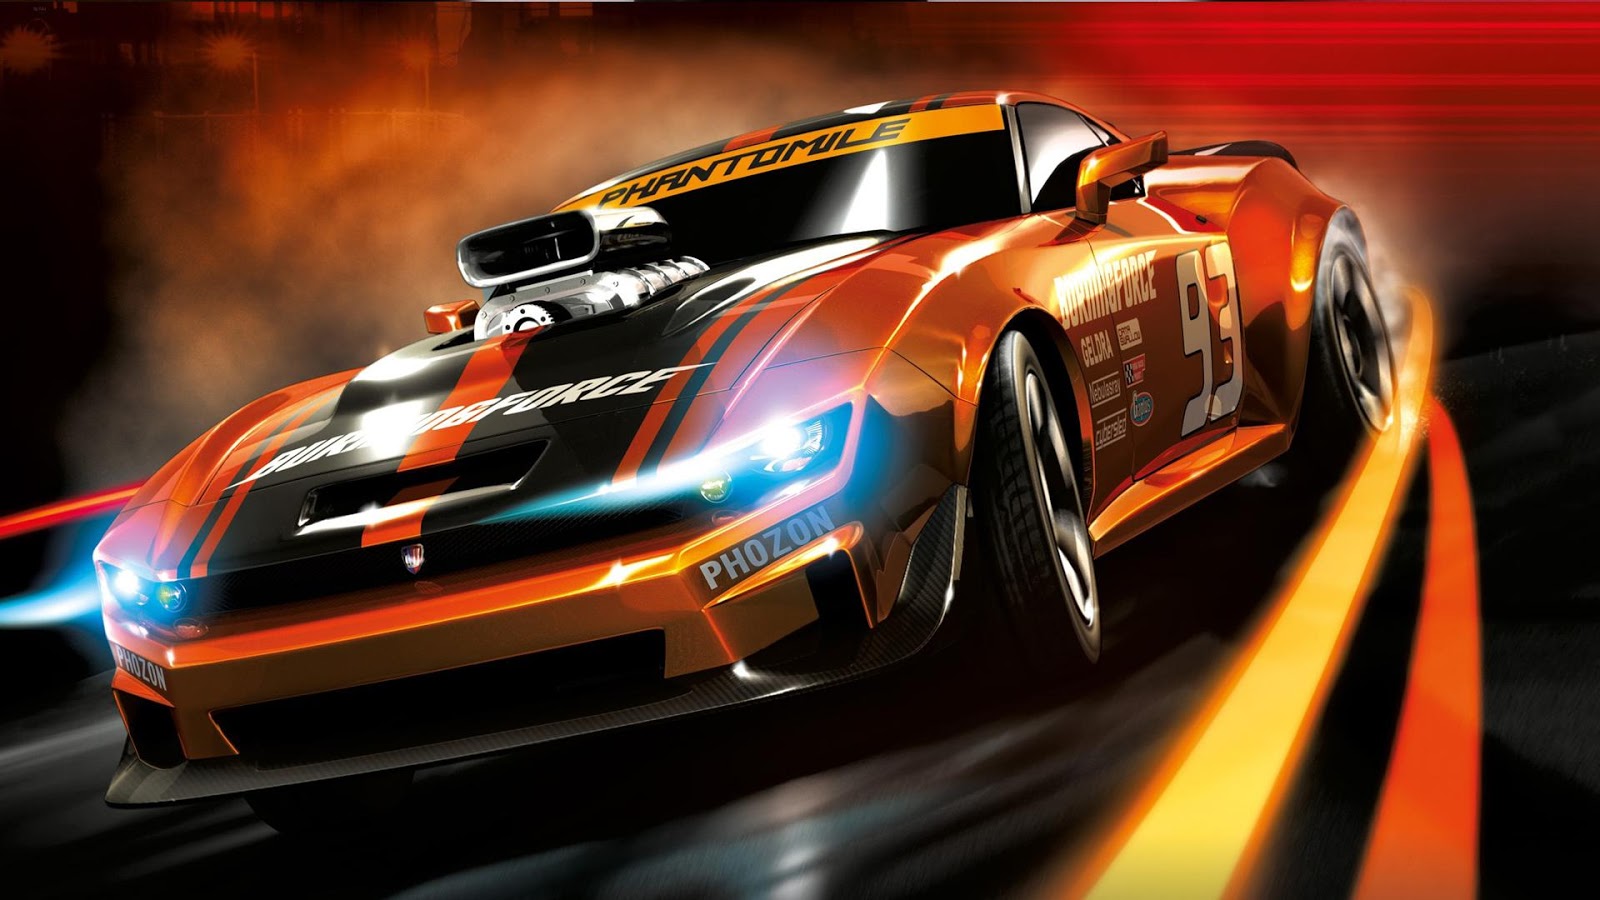 Racing Cars Live Wallpaper - Android Apps on Google Play